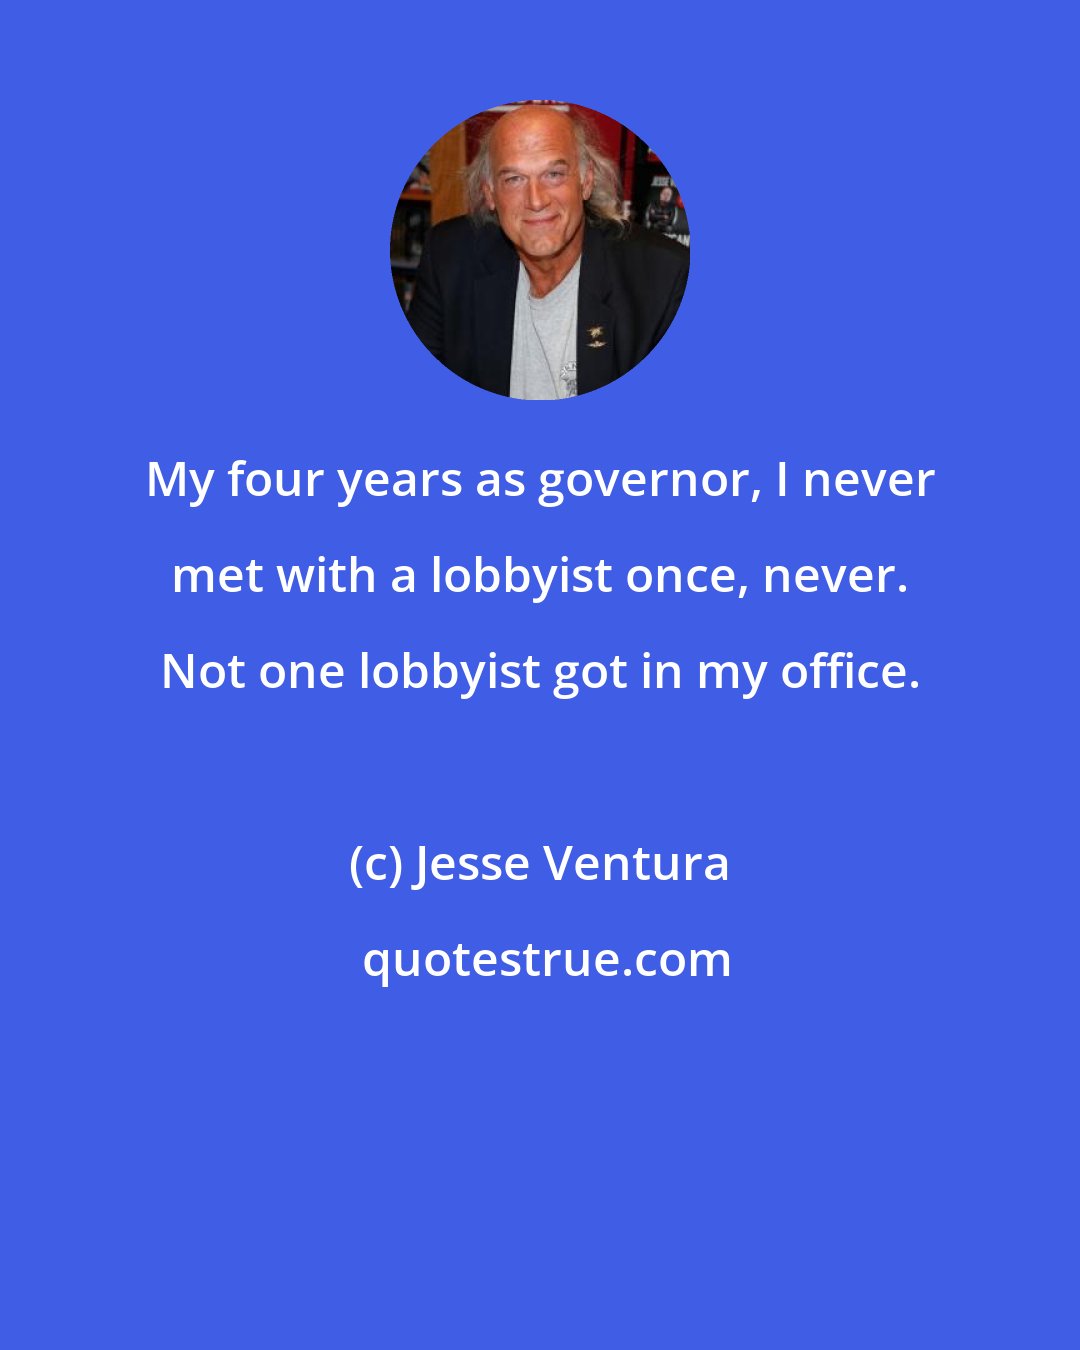 Jesse Ventura: My four years as governor, I never met with a lobbyist once, never. Not one lobbyist got in my office.